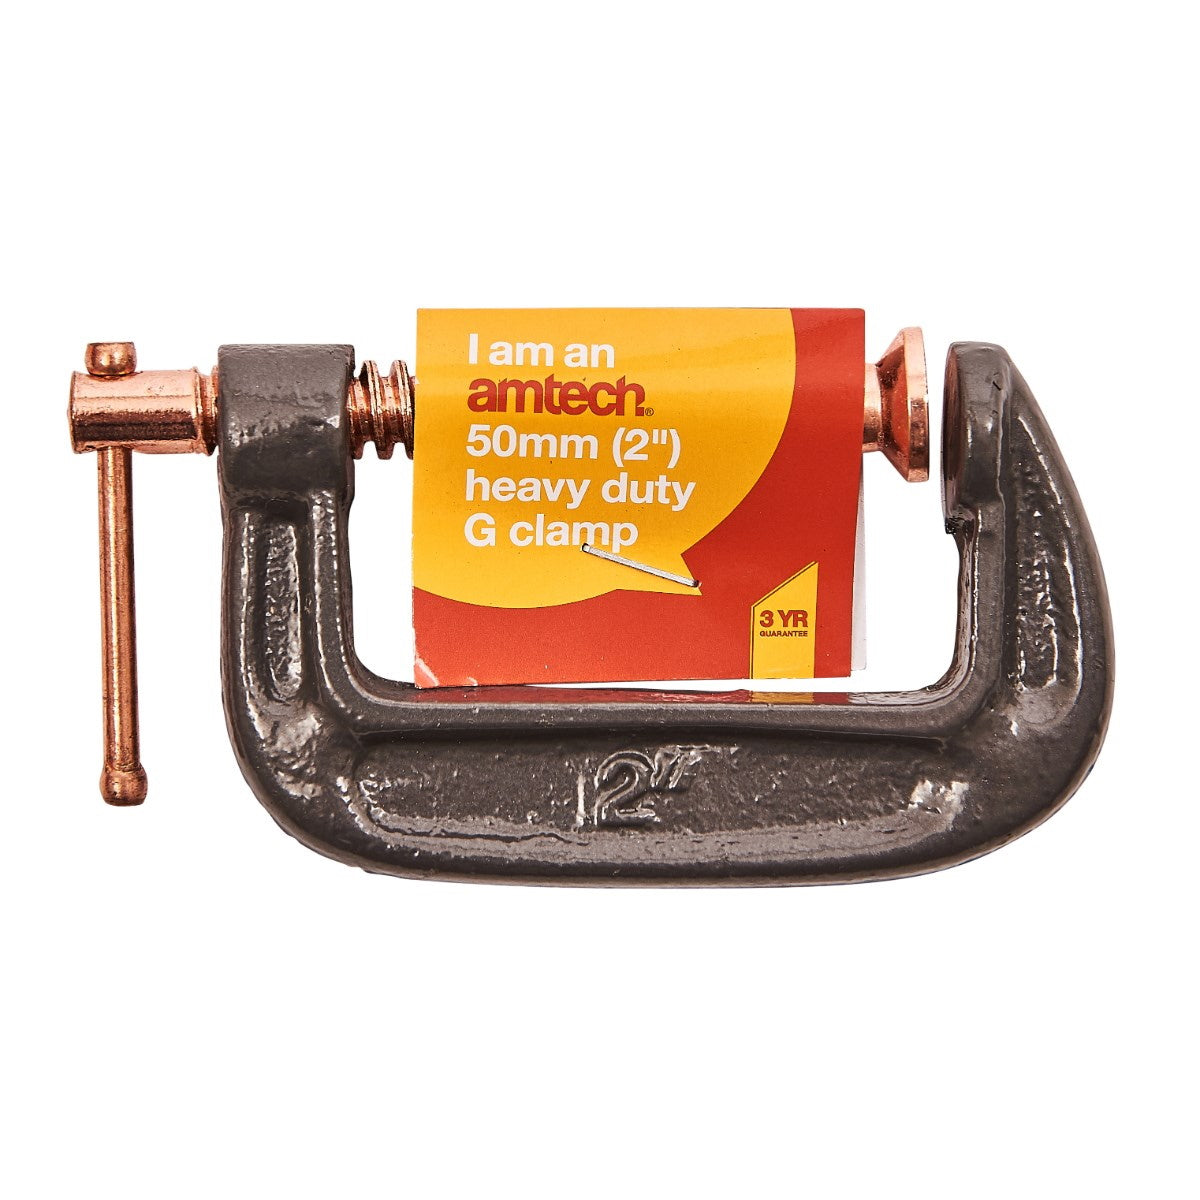 Amtech W5690 Heavy Duty G Clamp 50mm / 2in - Premium Clamps from DK Tools - Just $2.5! Shop now at W Hurst & Son (IW) Ltd